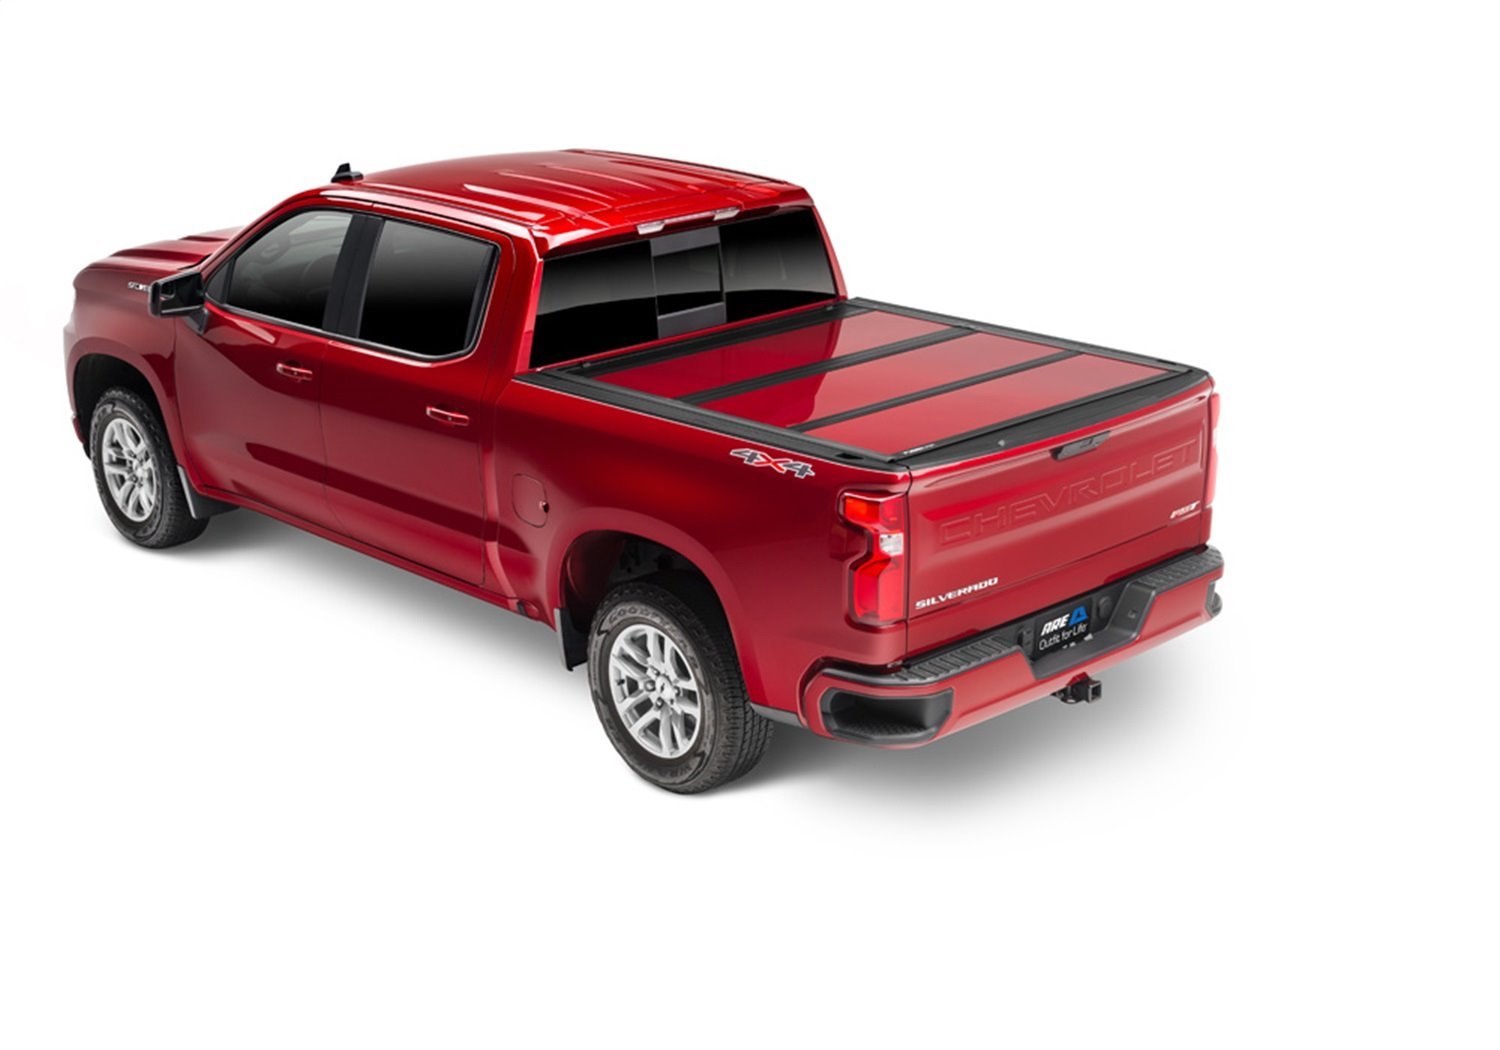 Fusion Tonneau Cover Fits Select Chevrolet Silverado/GMC Sierra 1500, 2500, 3500 [Bed: 5 ft. 8 in.]